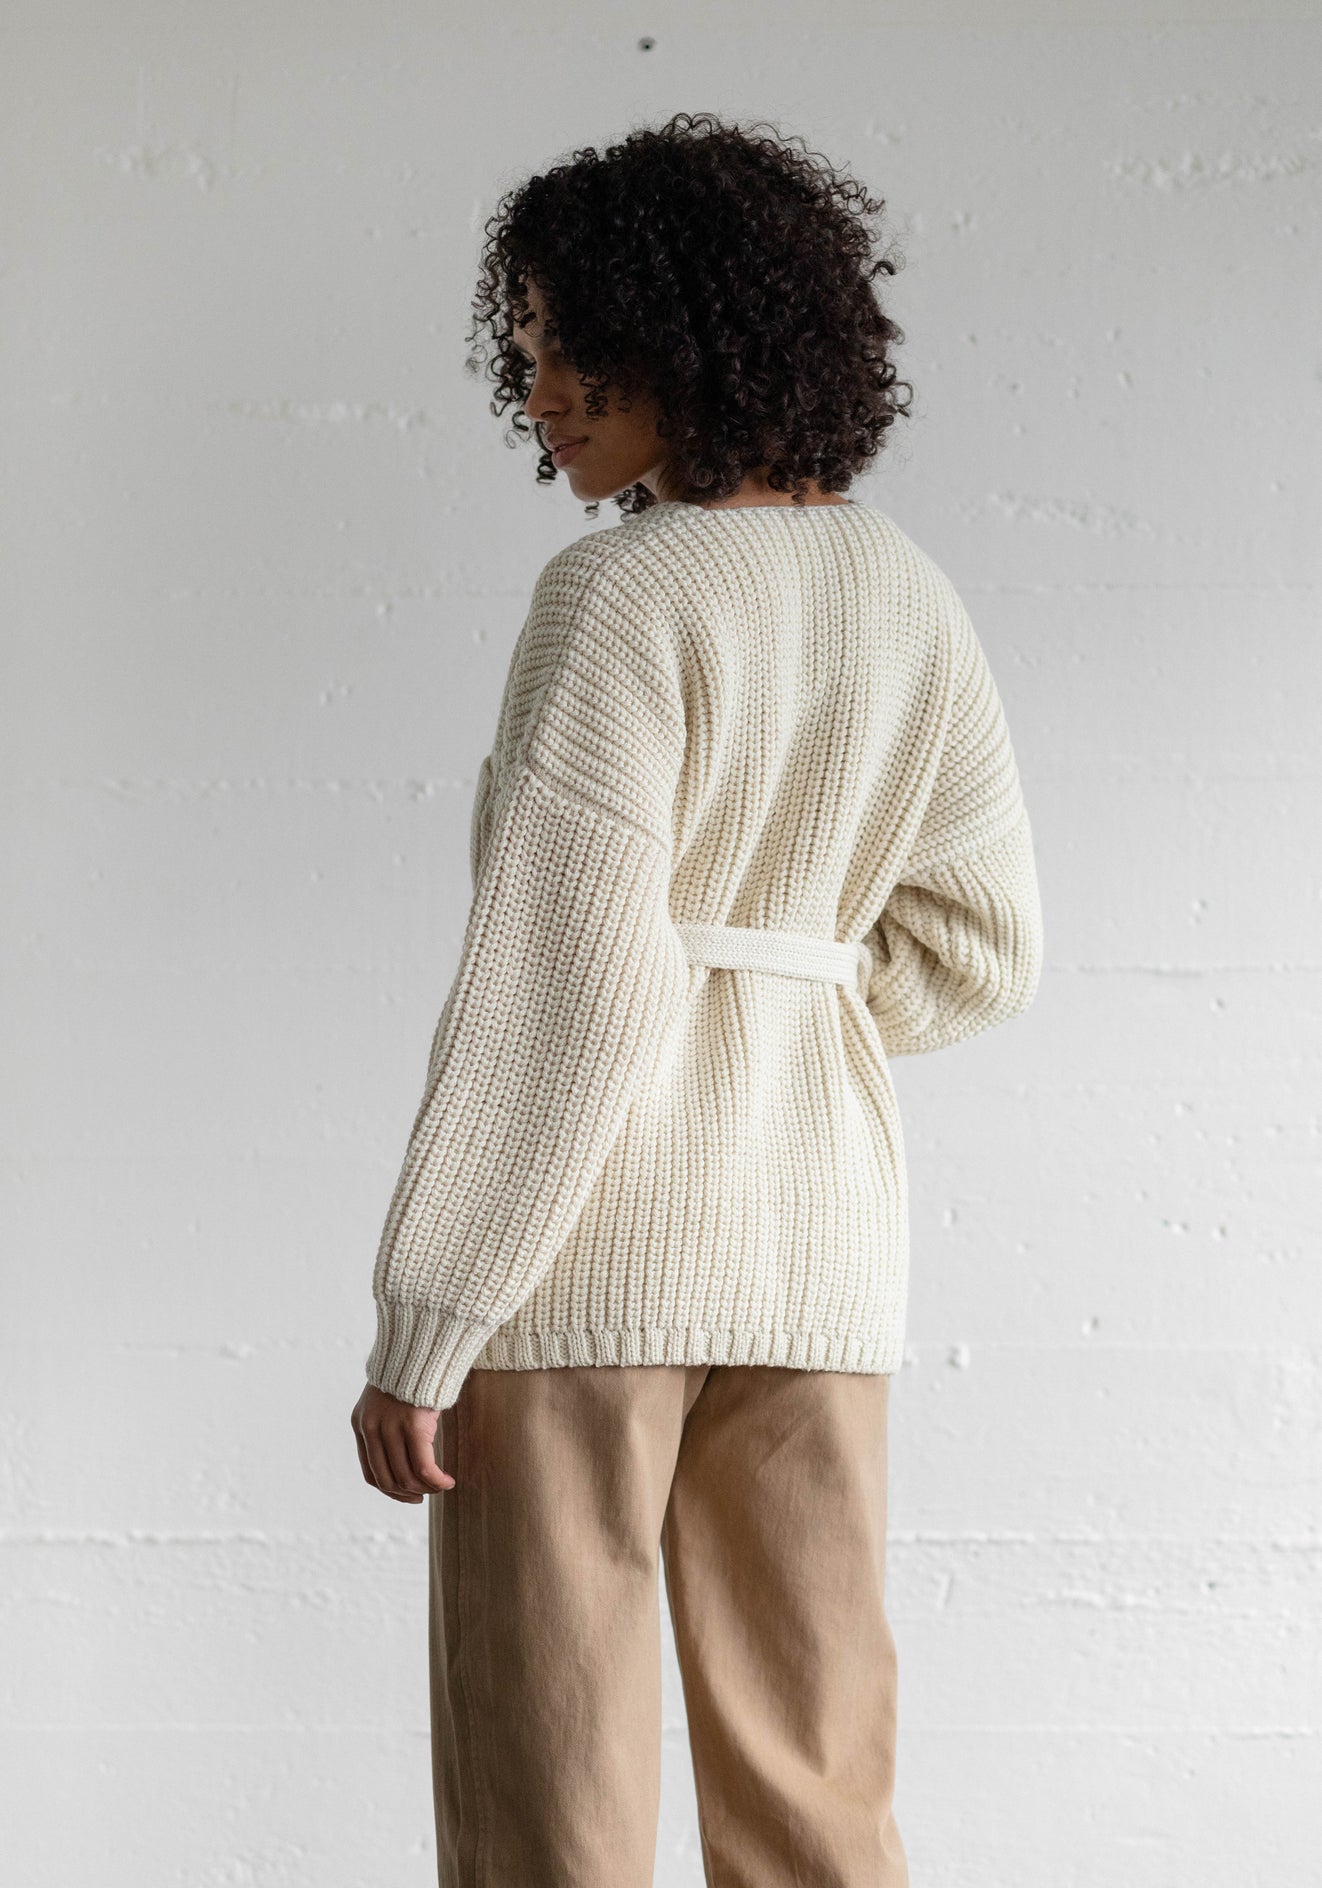 Knit in Peru from 100% undyed Andean Highland Eco Wool. Styled with a wide bulky stitch, front pockets, and an adjustable belt closure to wrap up for cold days ahead.